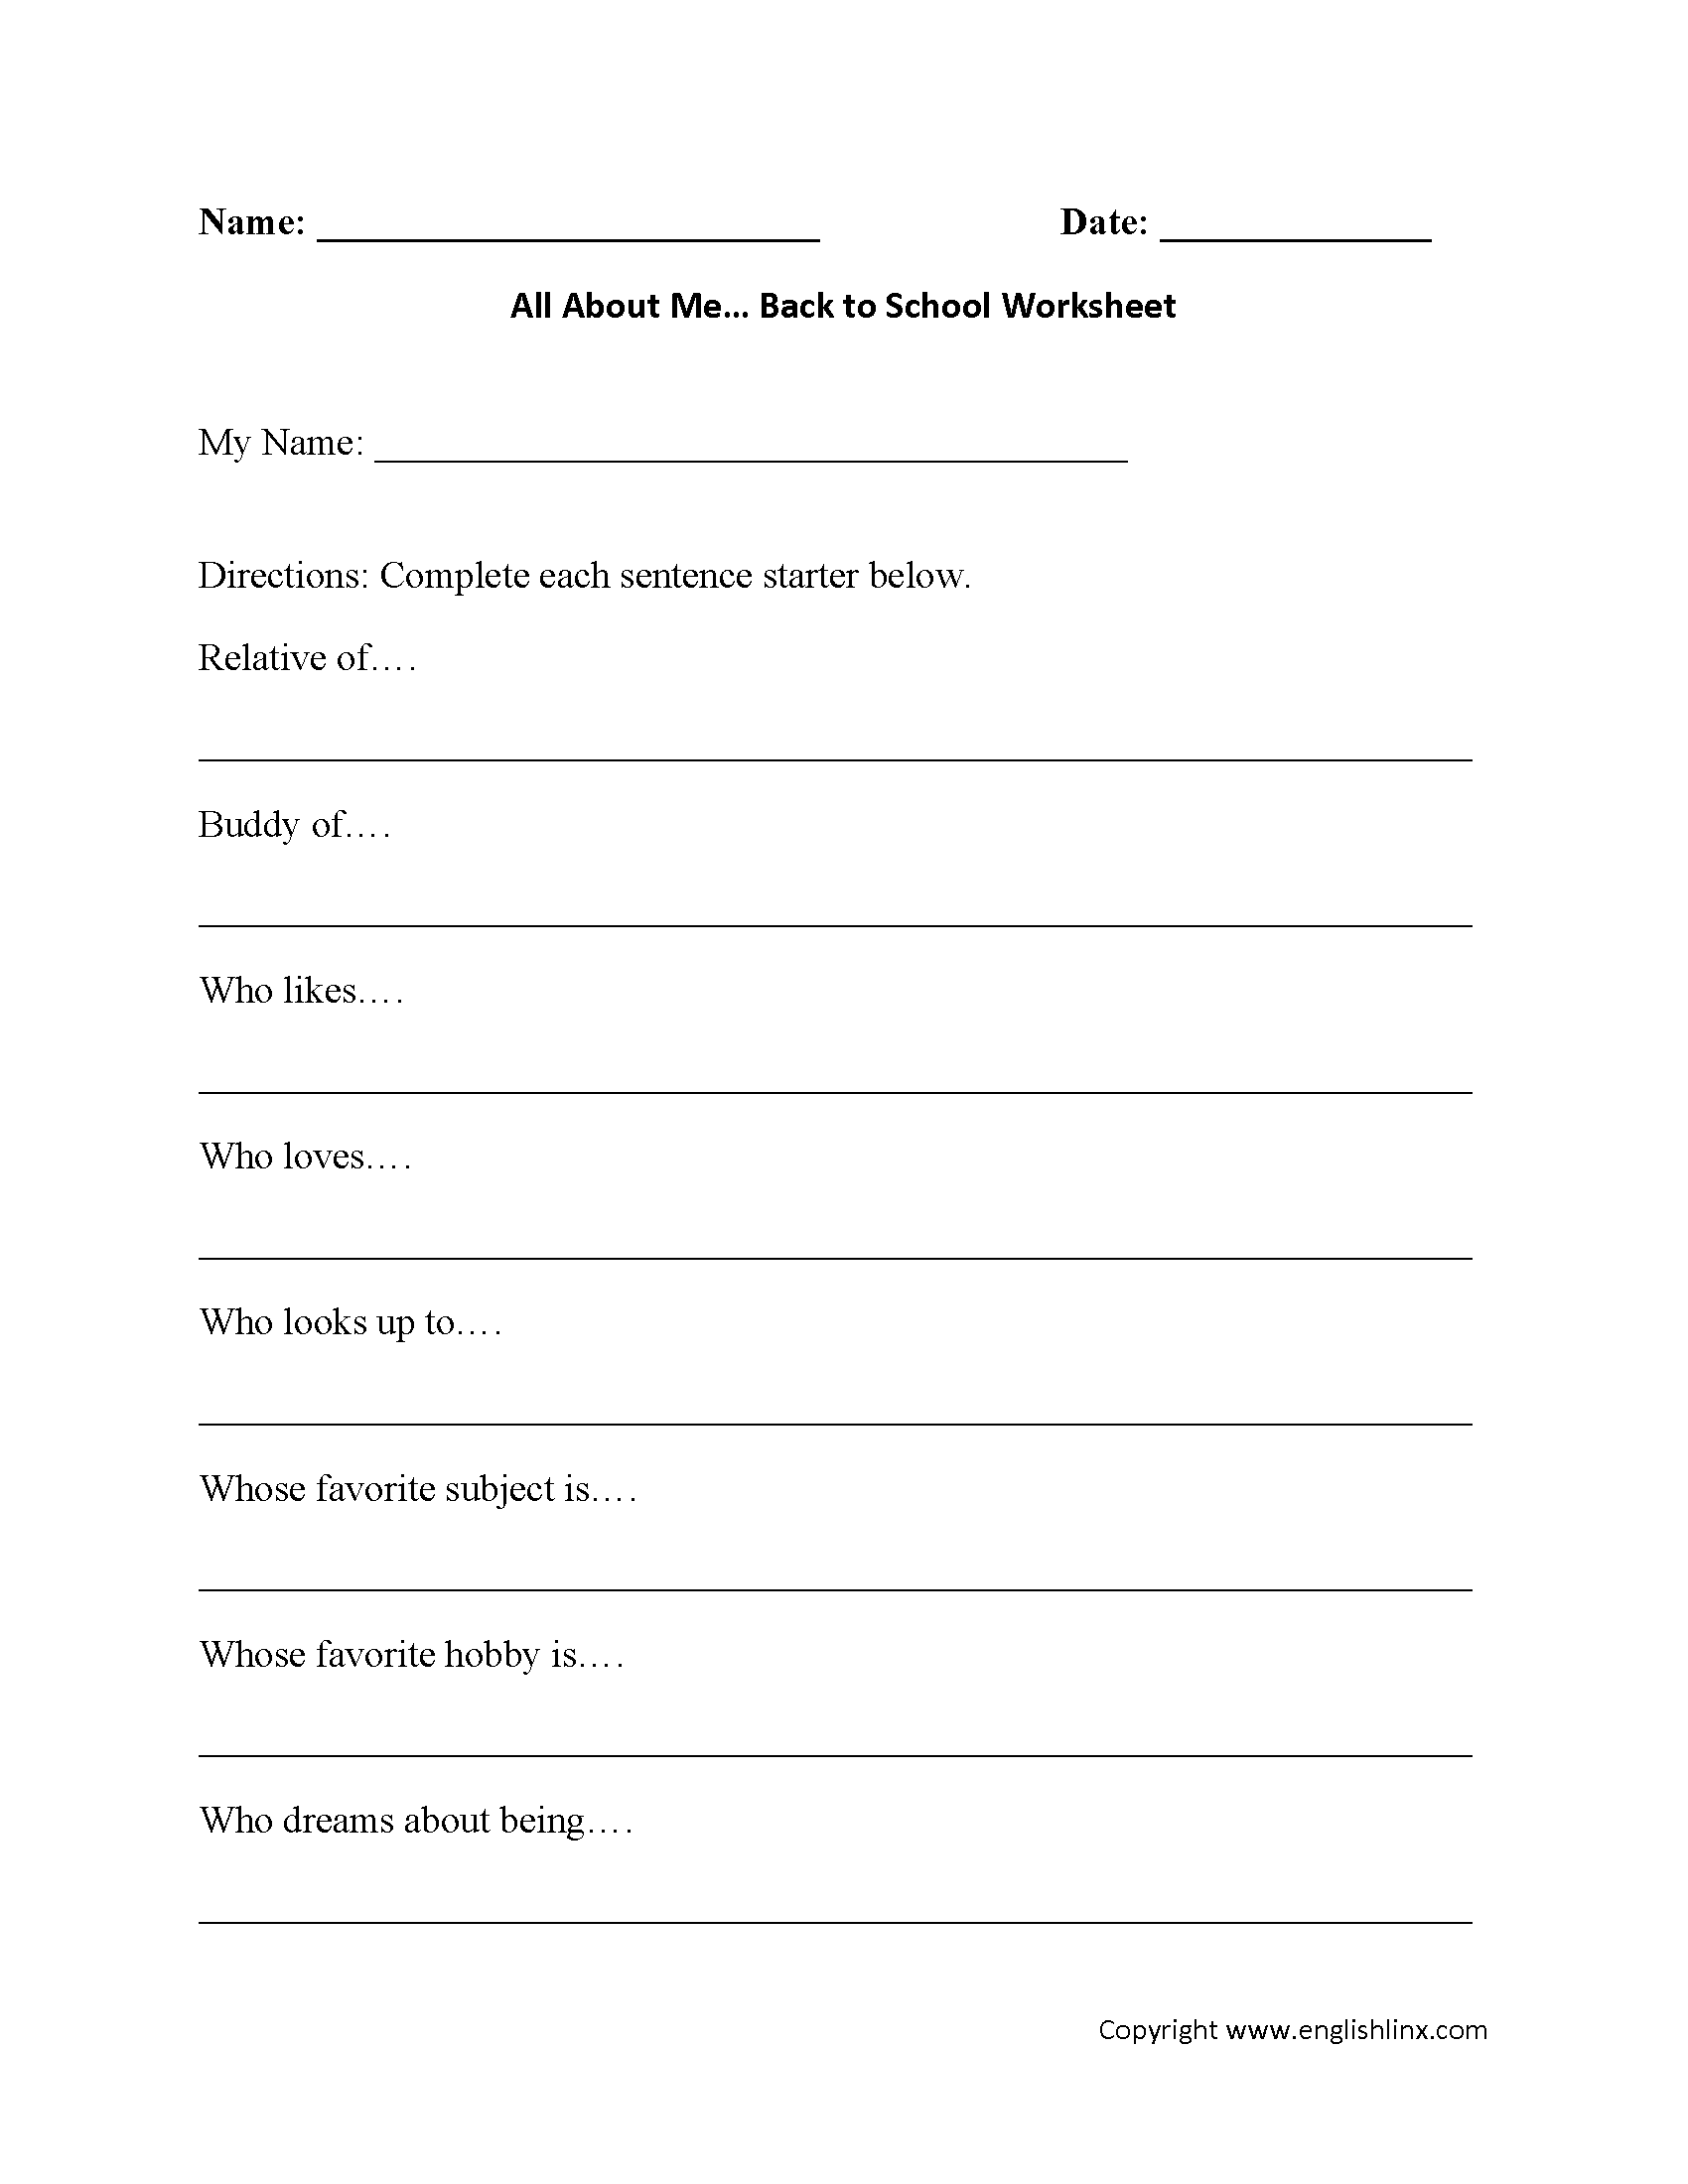 All About Me Back to School Worksheets